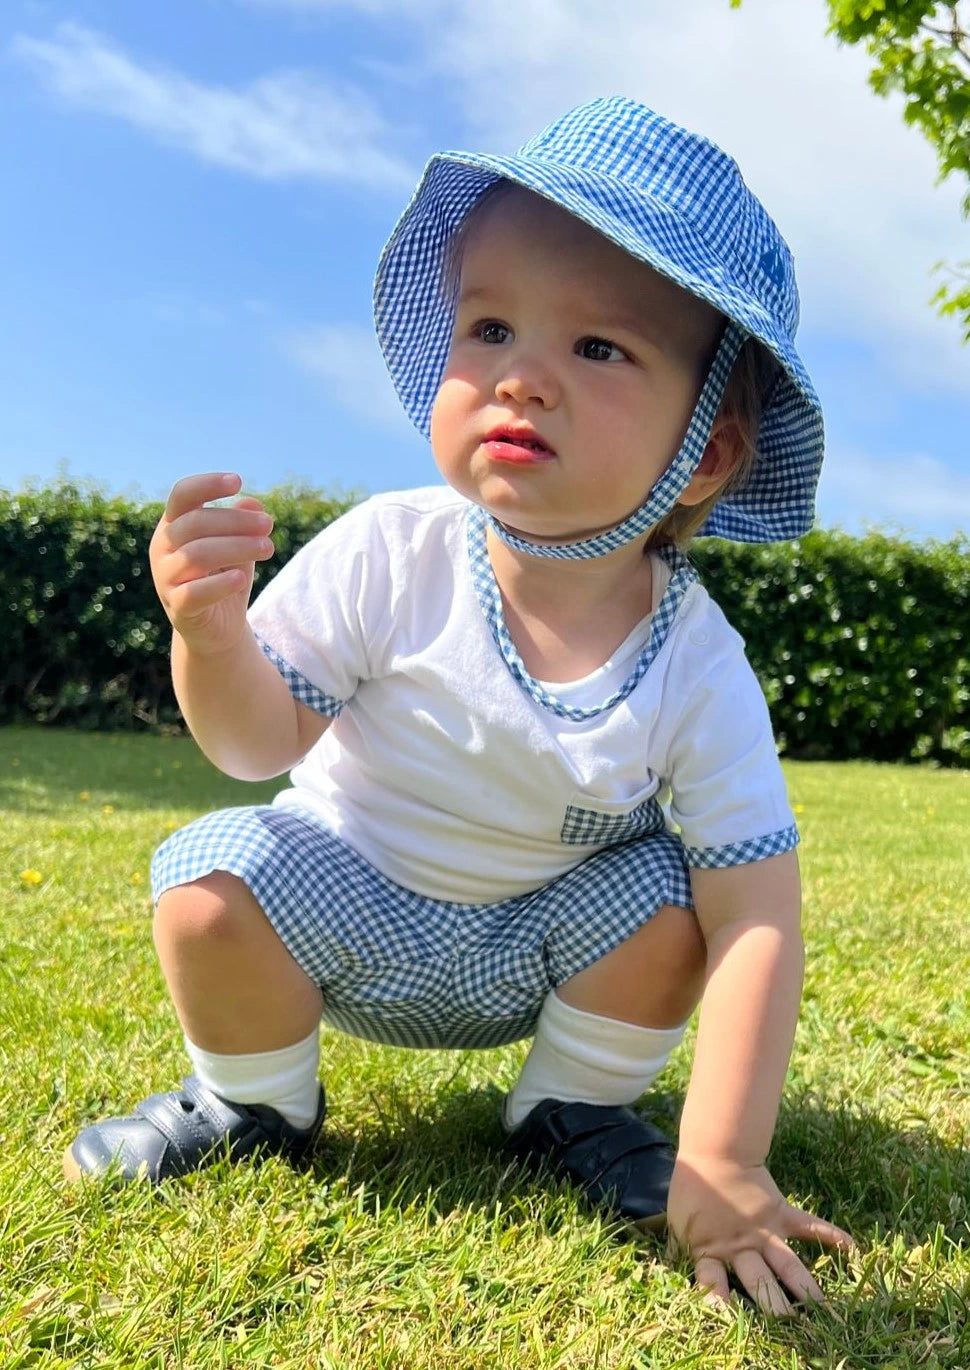 Blue Check T-Shirt & Shorts Set by Portuguese Brand modelled by tors childrens wear brand rep angus